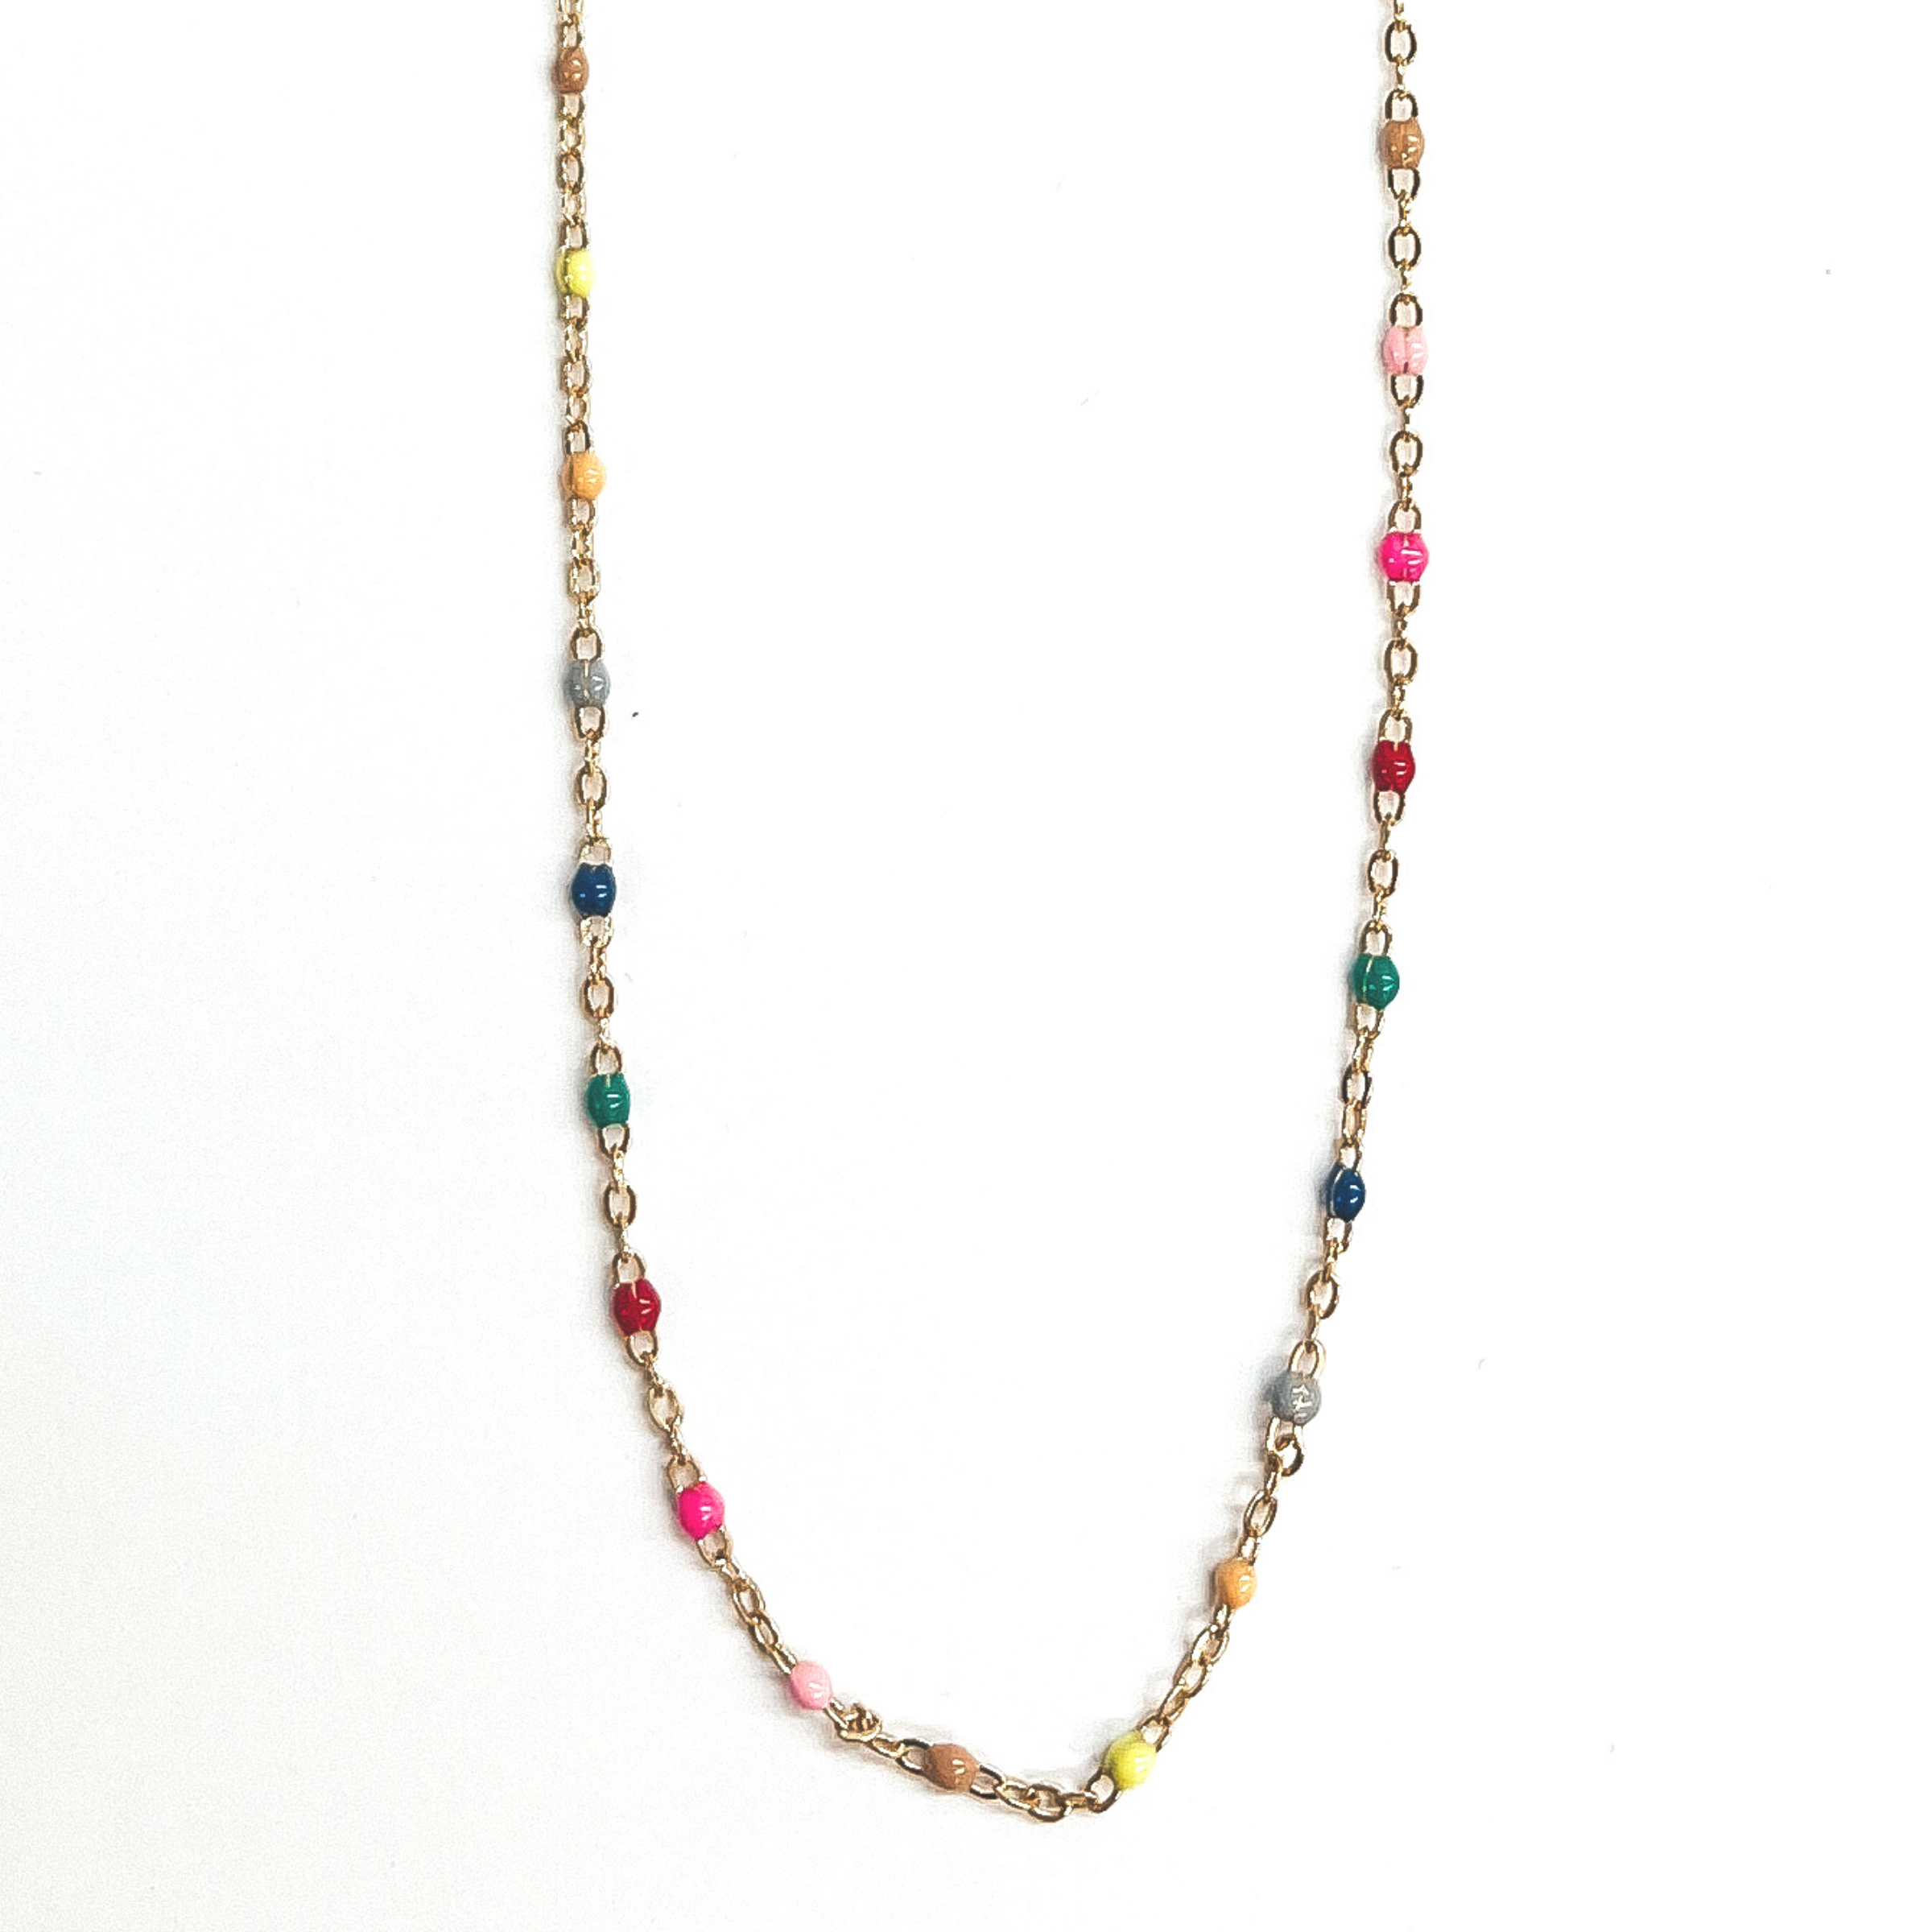 36 Inch Gold Necklace with Multicolored Beads - Giddy Up Glamour Boutique